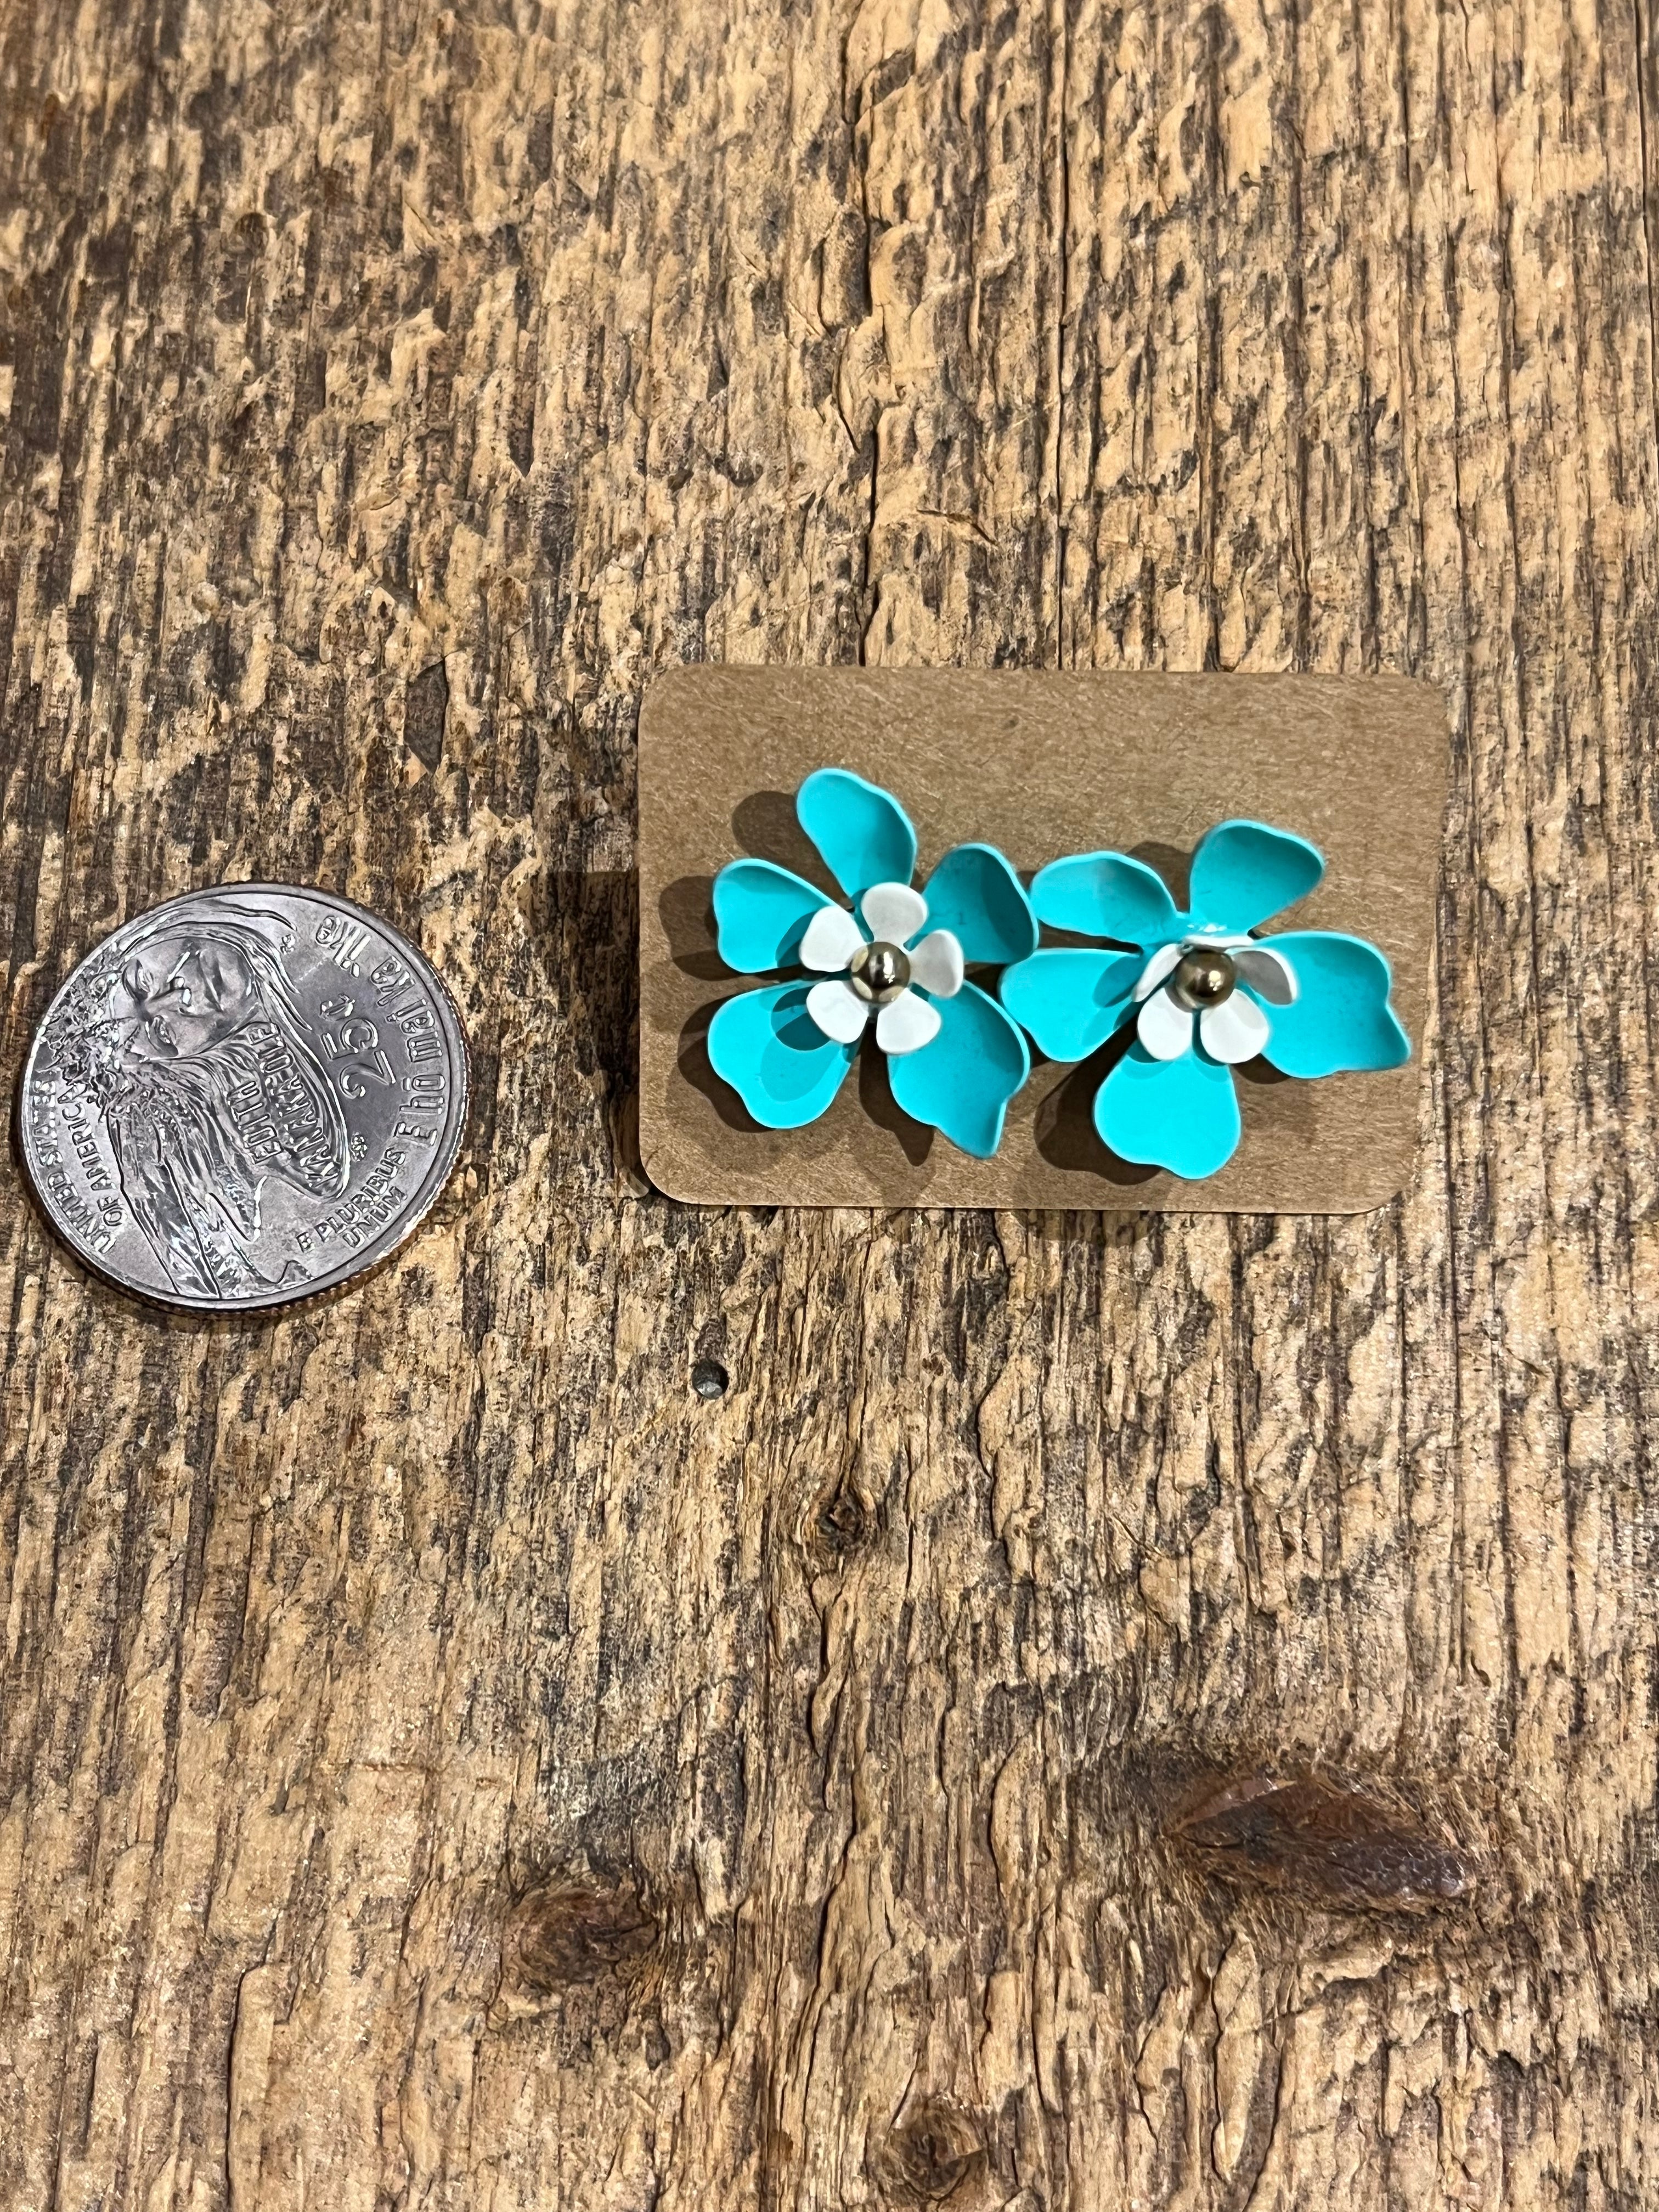 Pressed Floral Stud Earrings in Mint and White